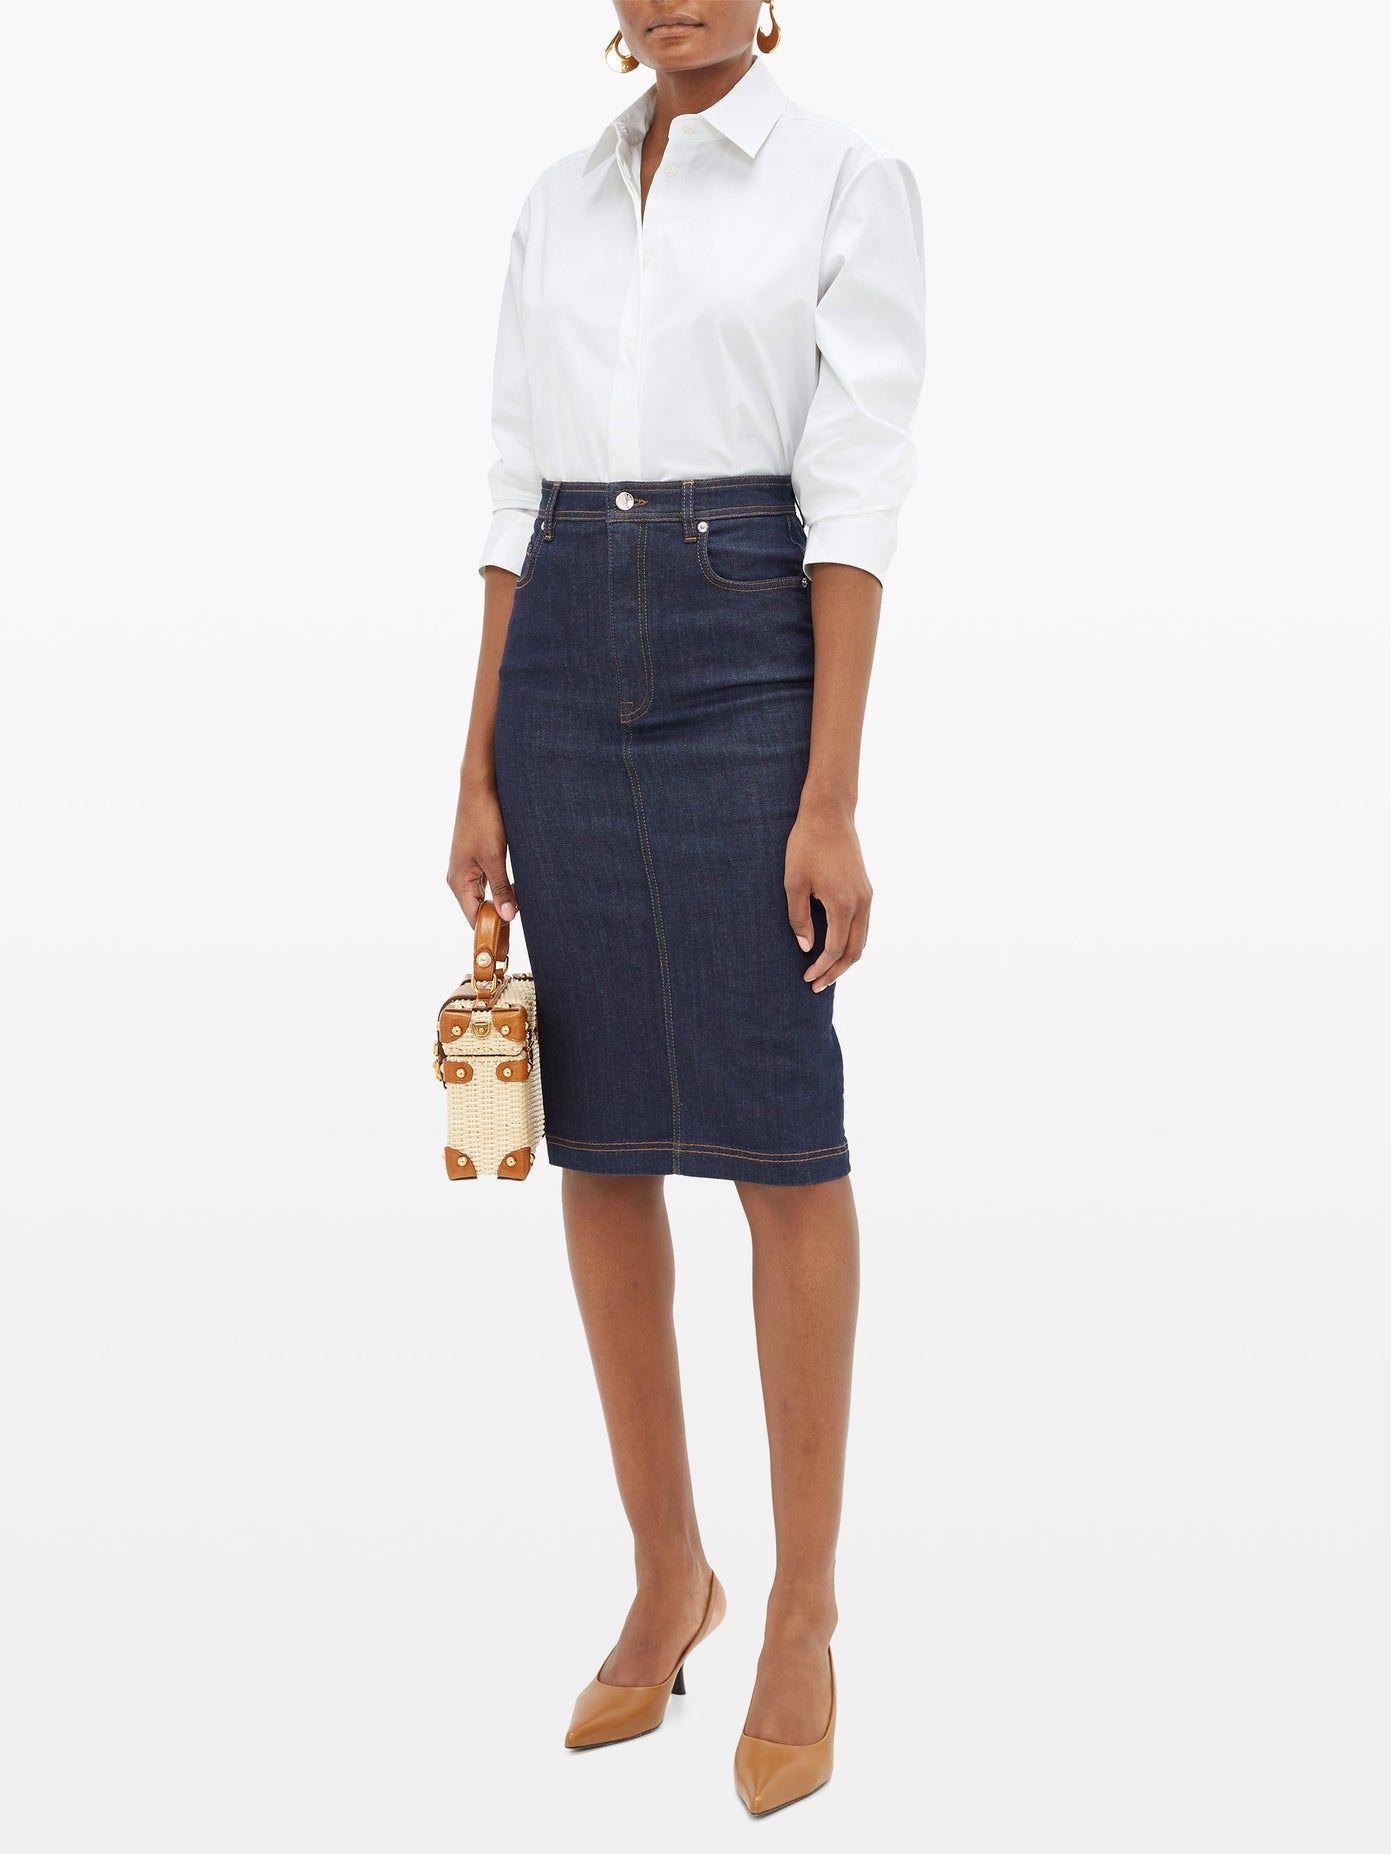 Why denim pencil skirts are exactly what
you need